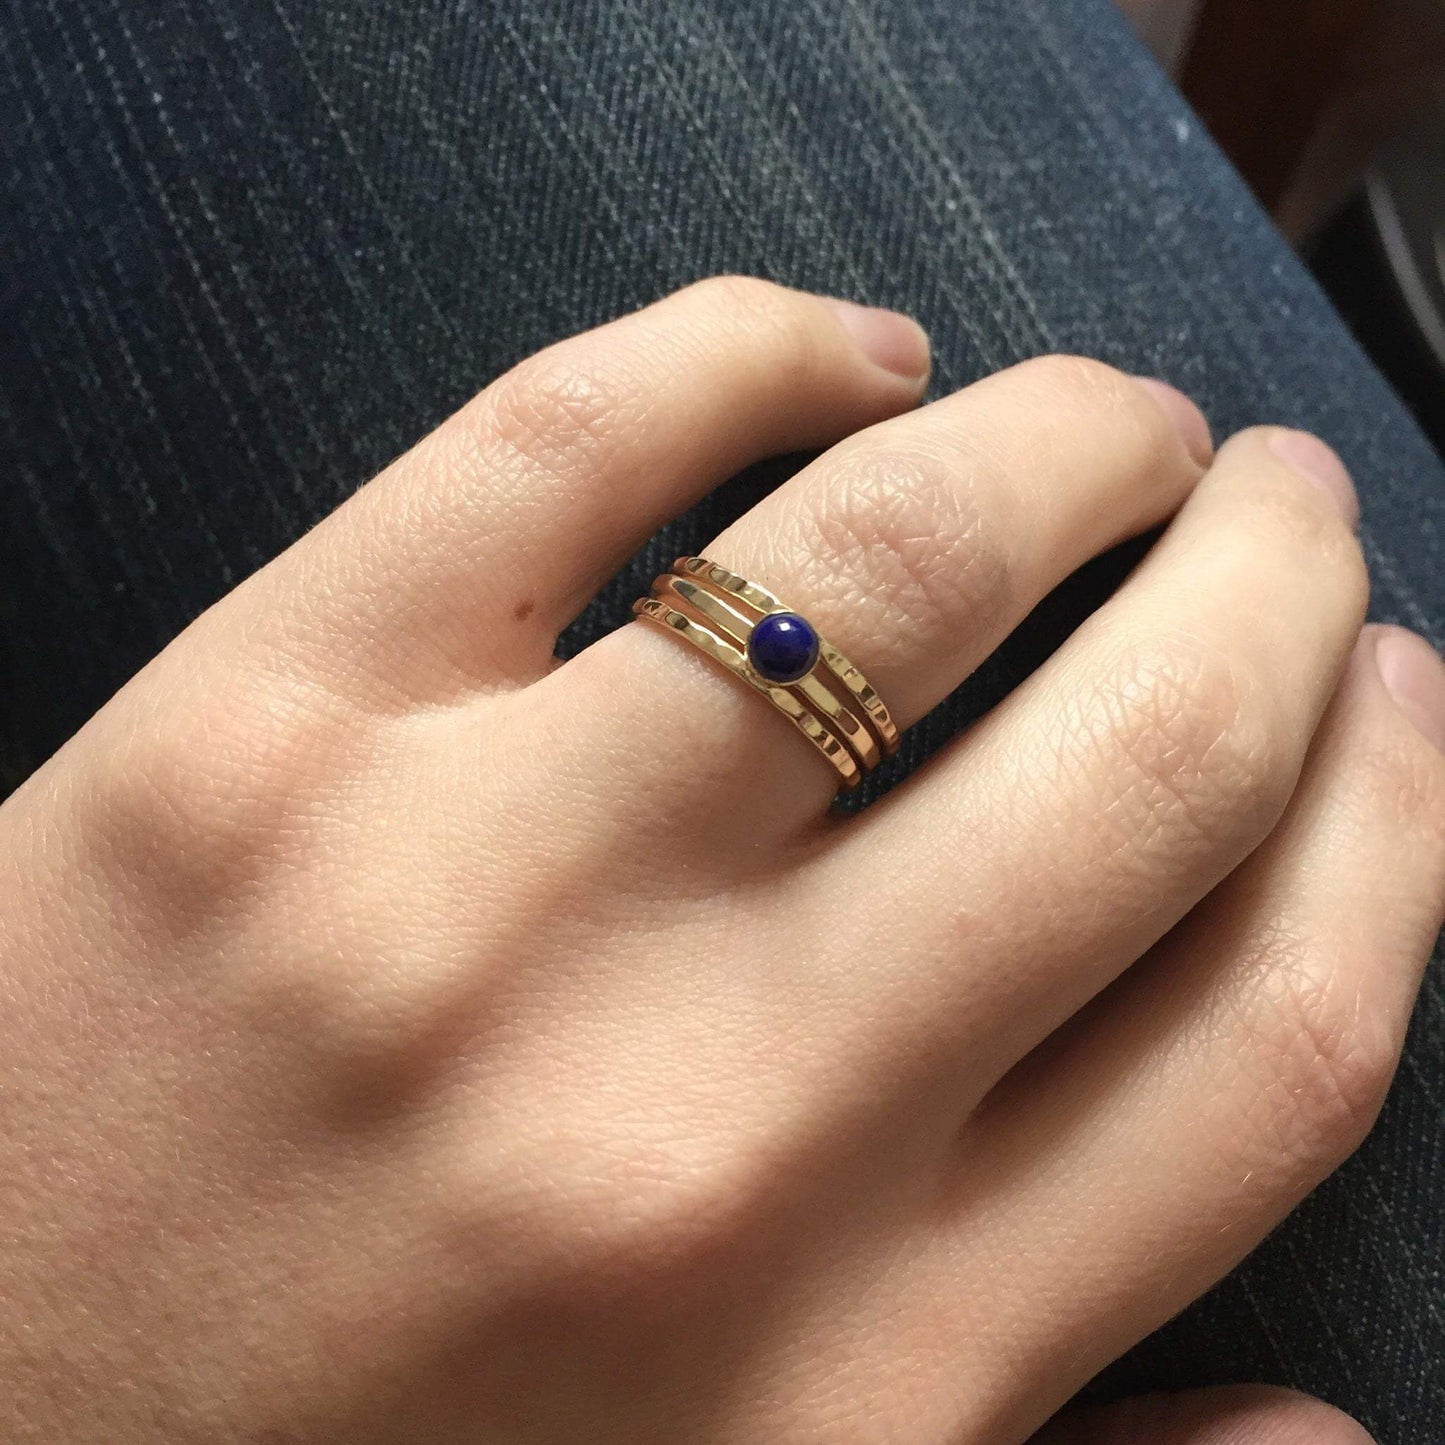 Set of Three 14k Gold Stacking Rings with Lapis Lazuli - Rebecca Cordingley